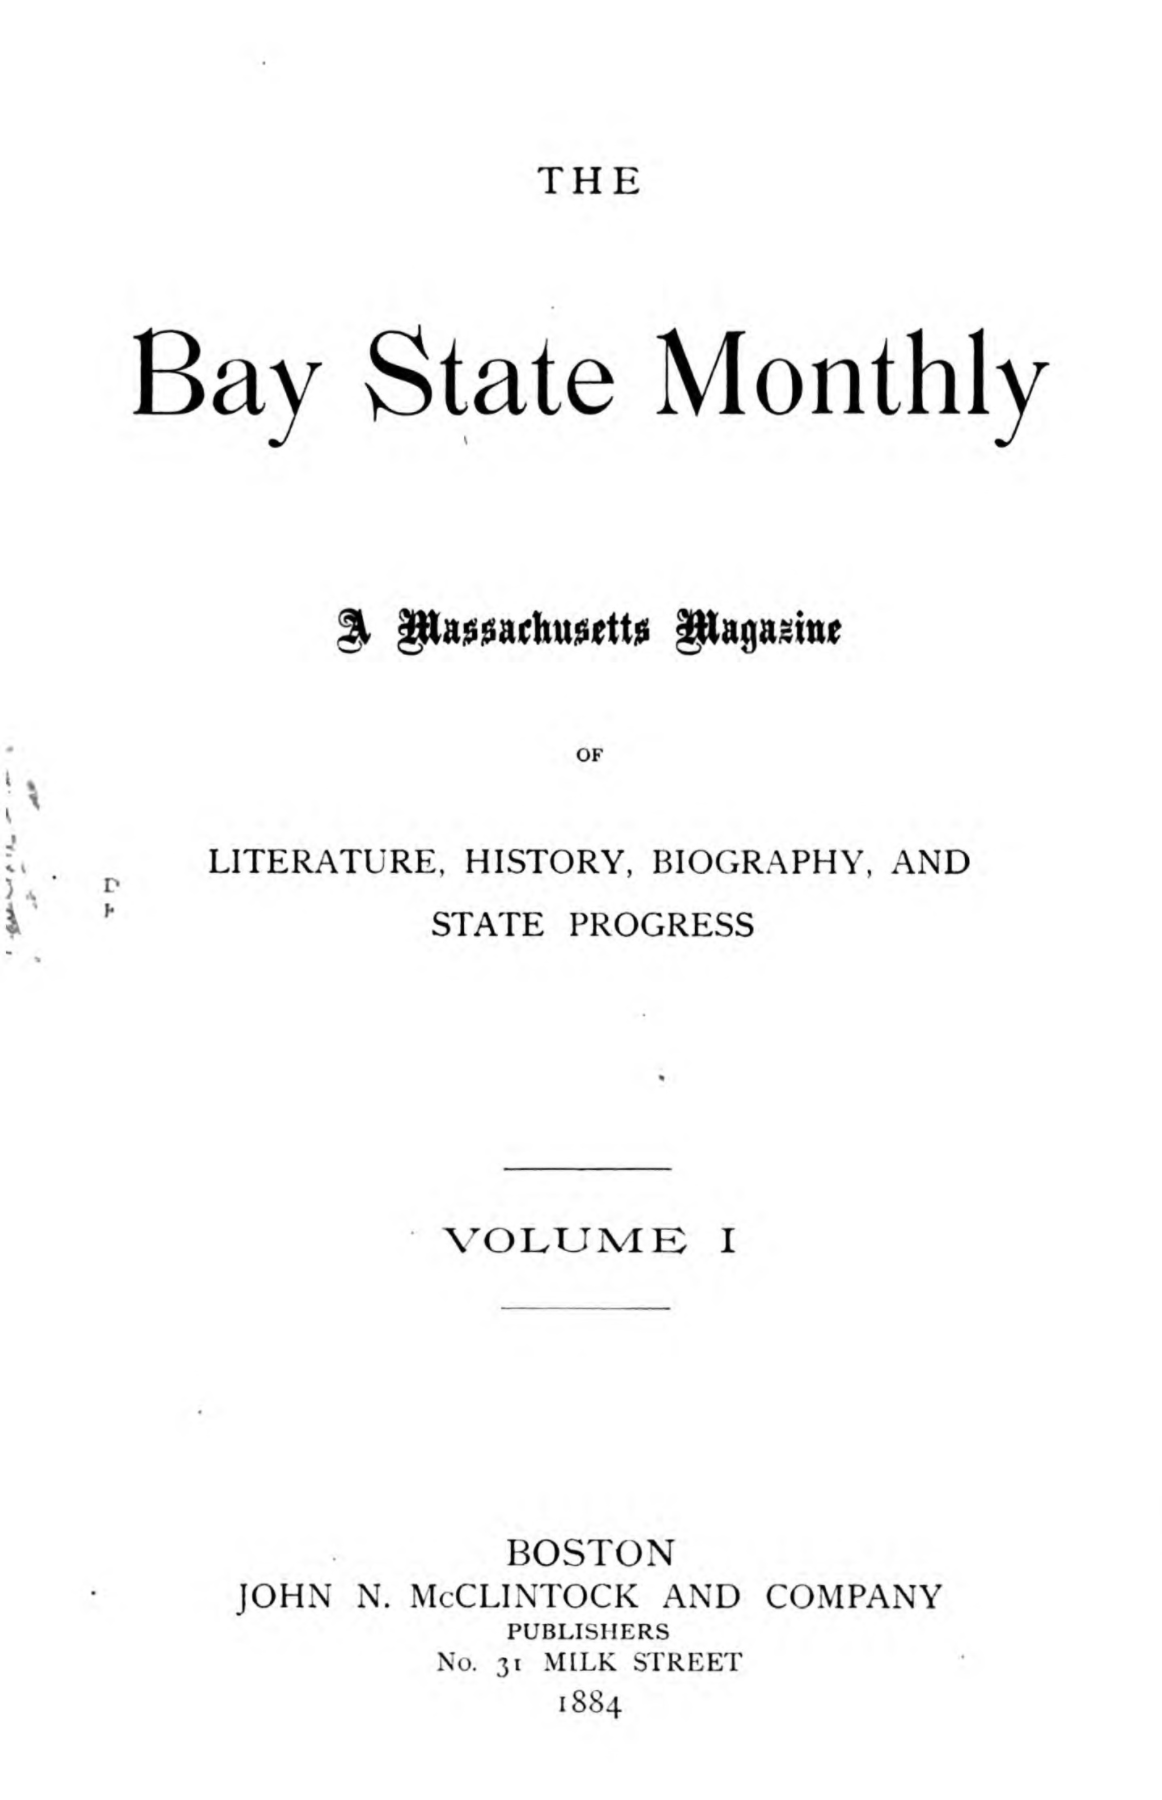 Cover, New England Magazine and Bay State Monthly